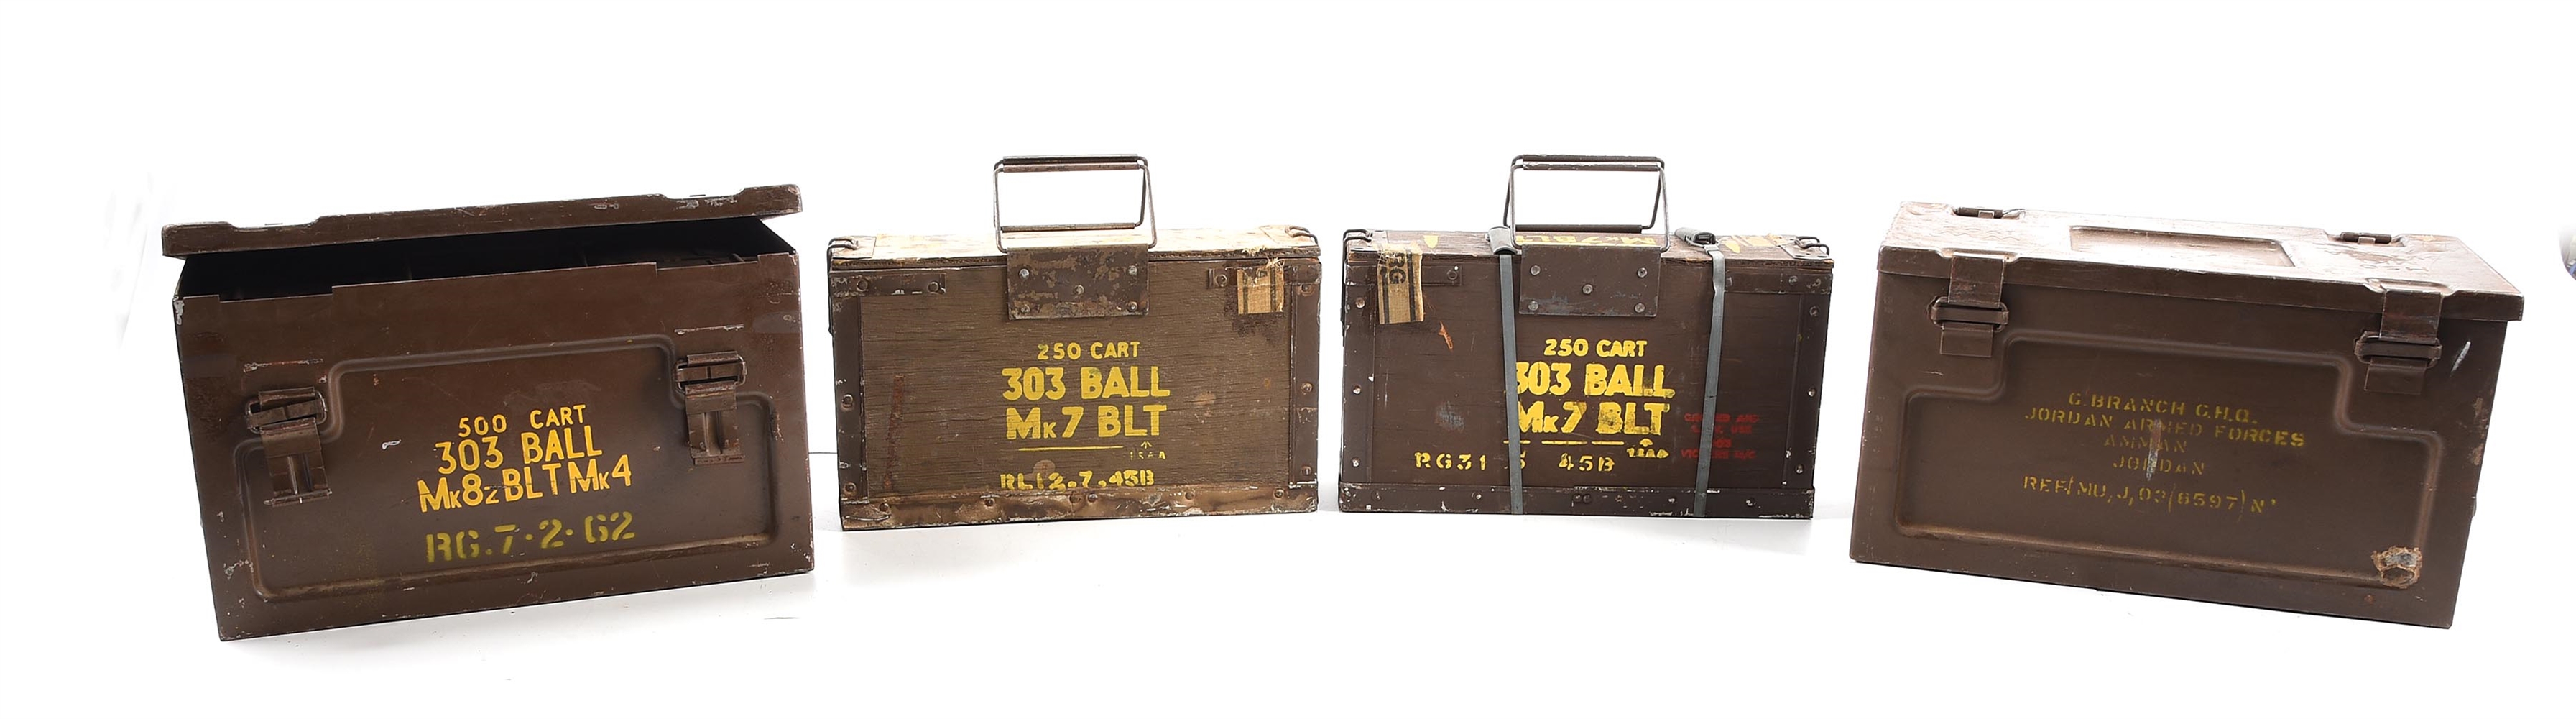 LOT OF 6: 6 WOOD AMMO CRATES OF 3000 ROUNDS OF .303 BRITISH MILITARY AMMUNITION, DATED BETWEEN 1945 AND 1962. 4 IN METAL CARRY CRATES.